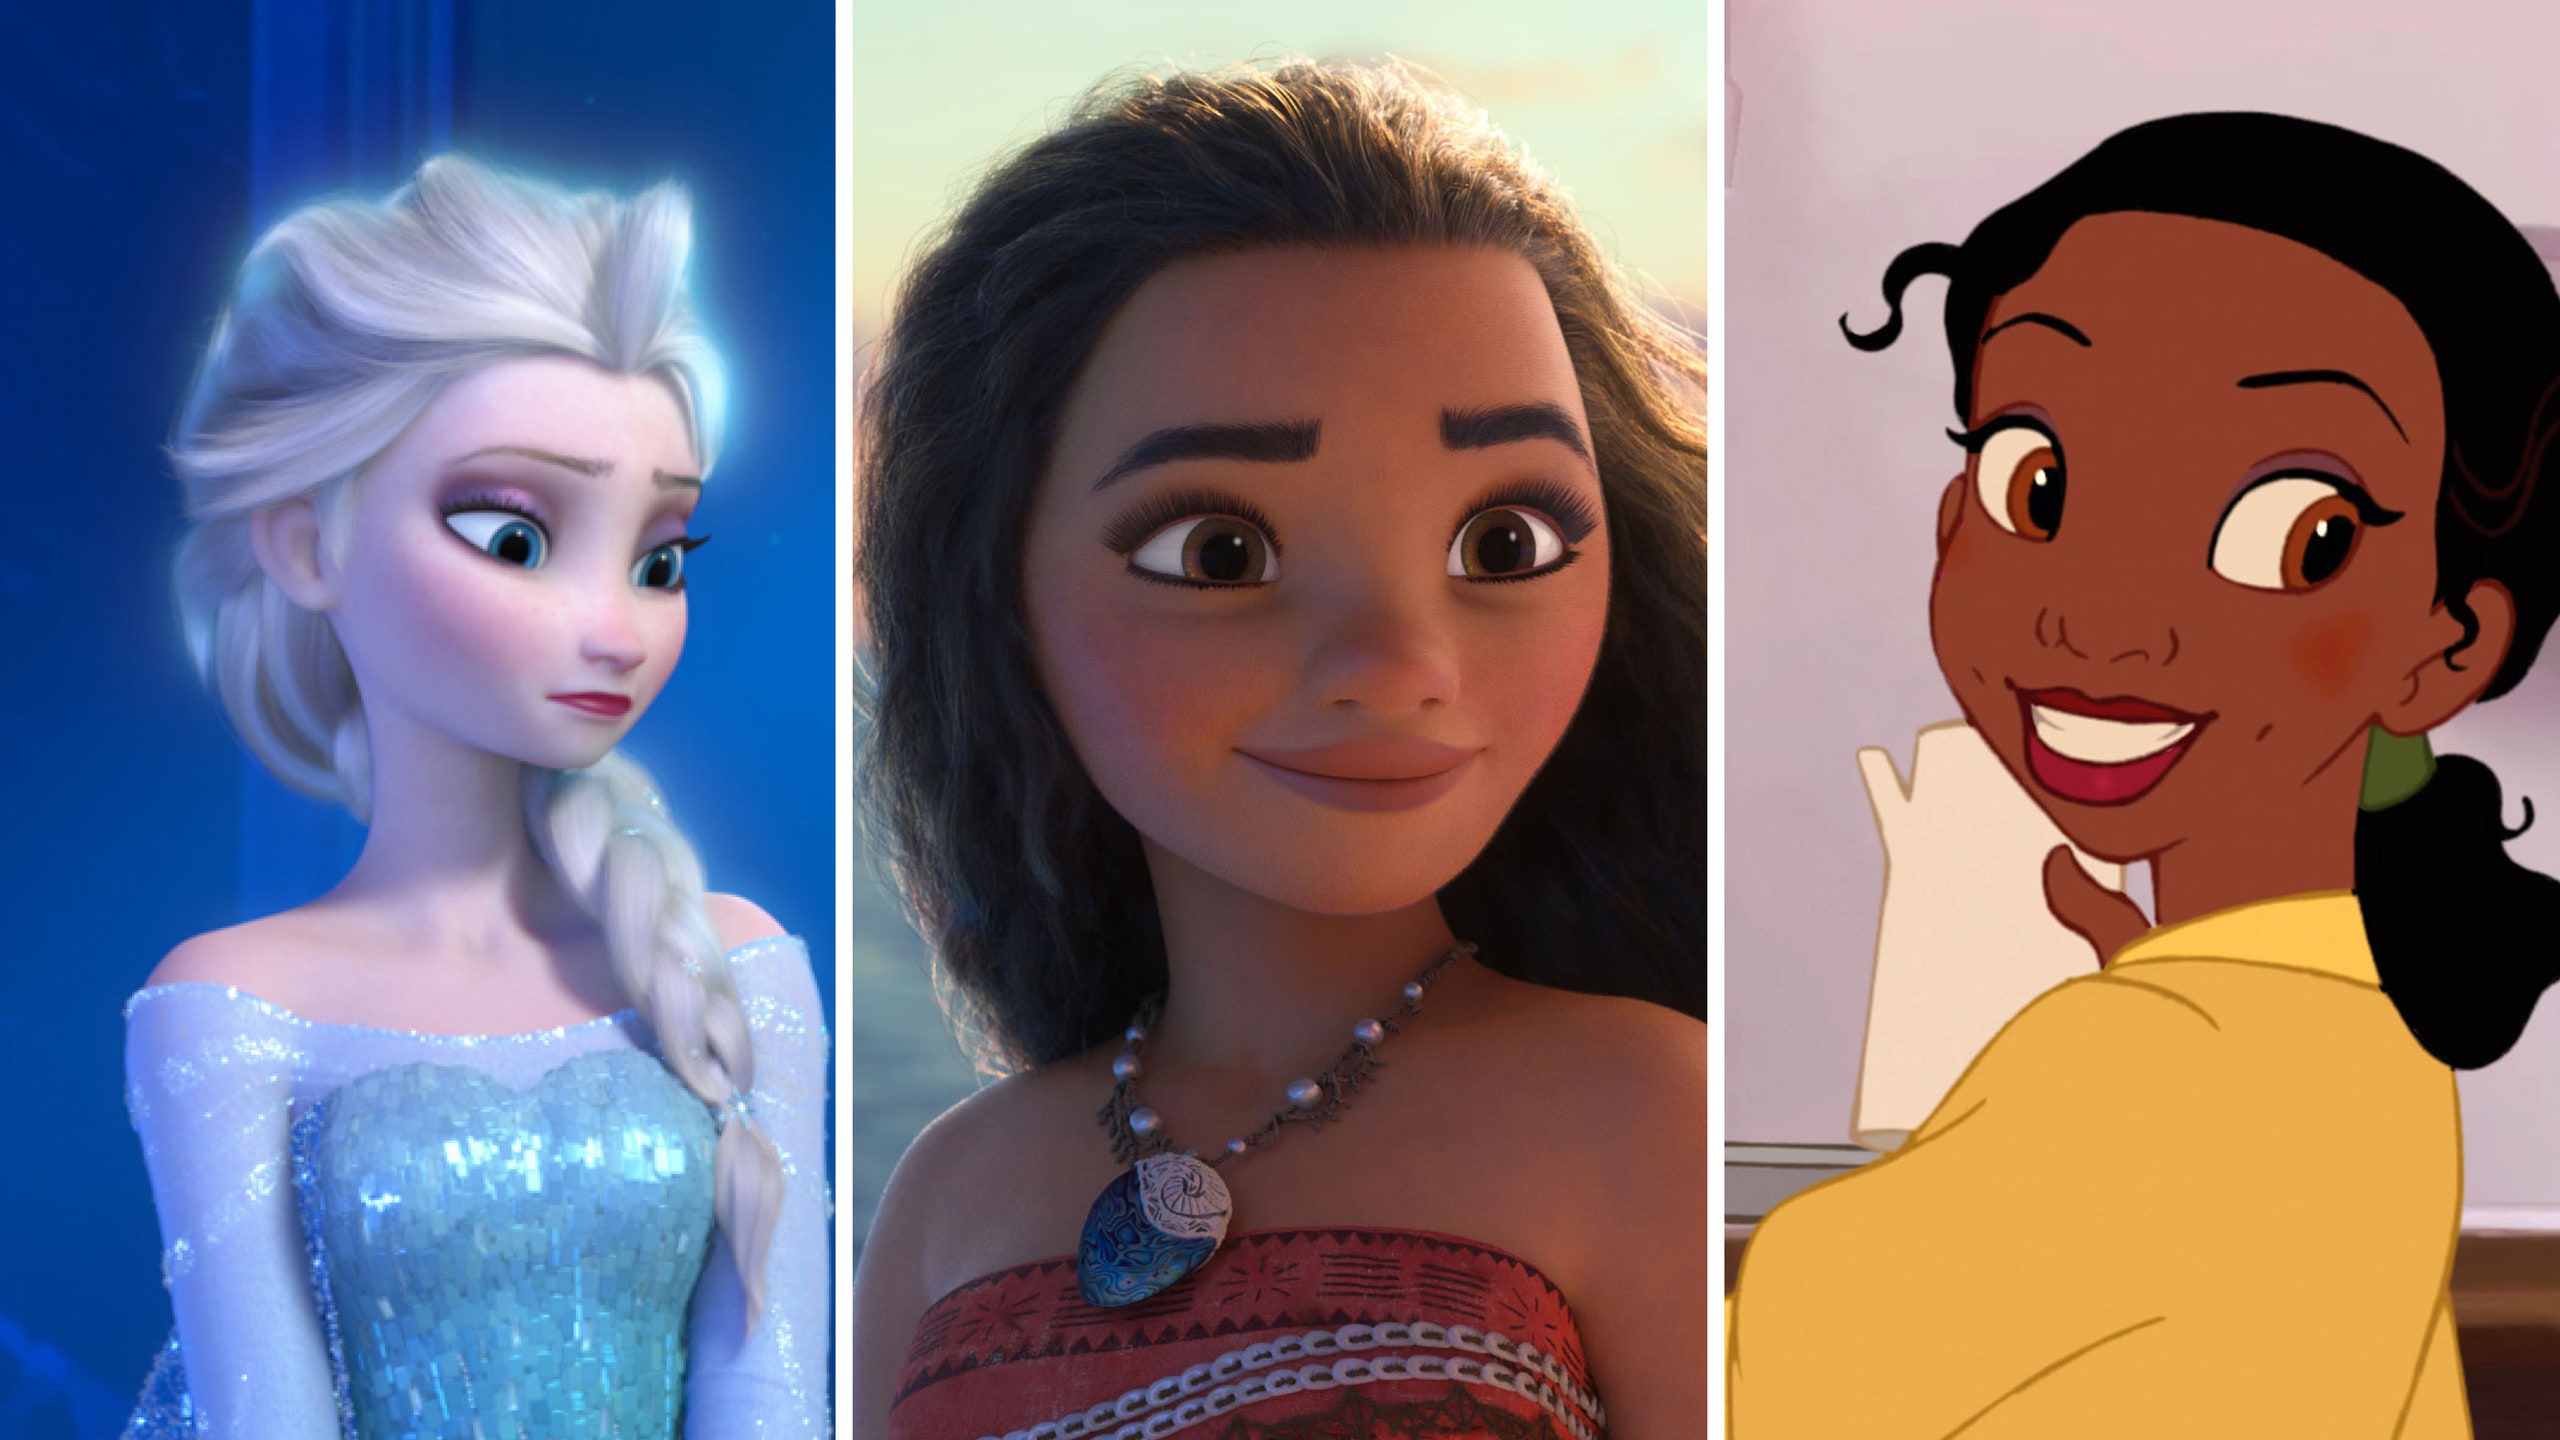 Wreck It Ralph 2 Features All The Disney Princesses In One Movie